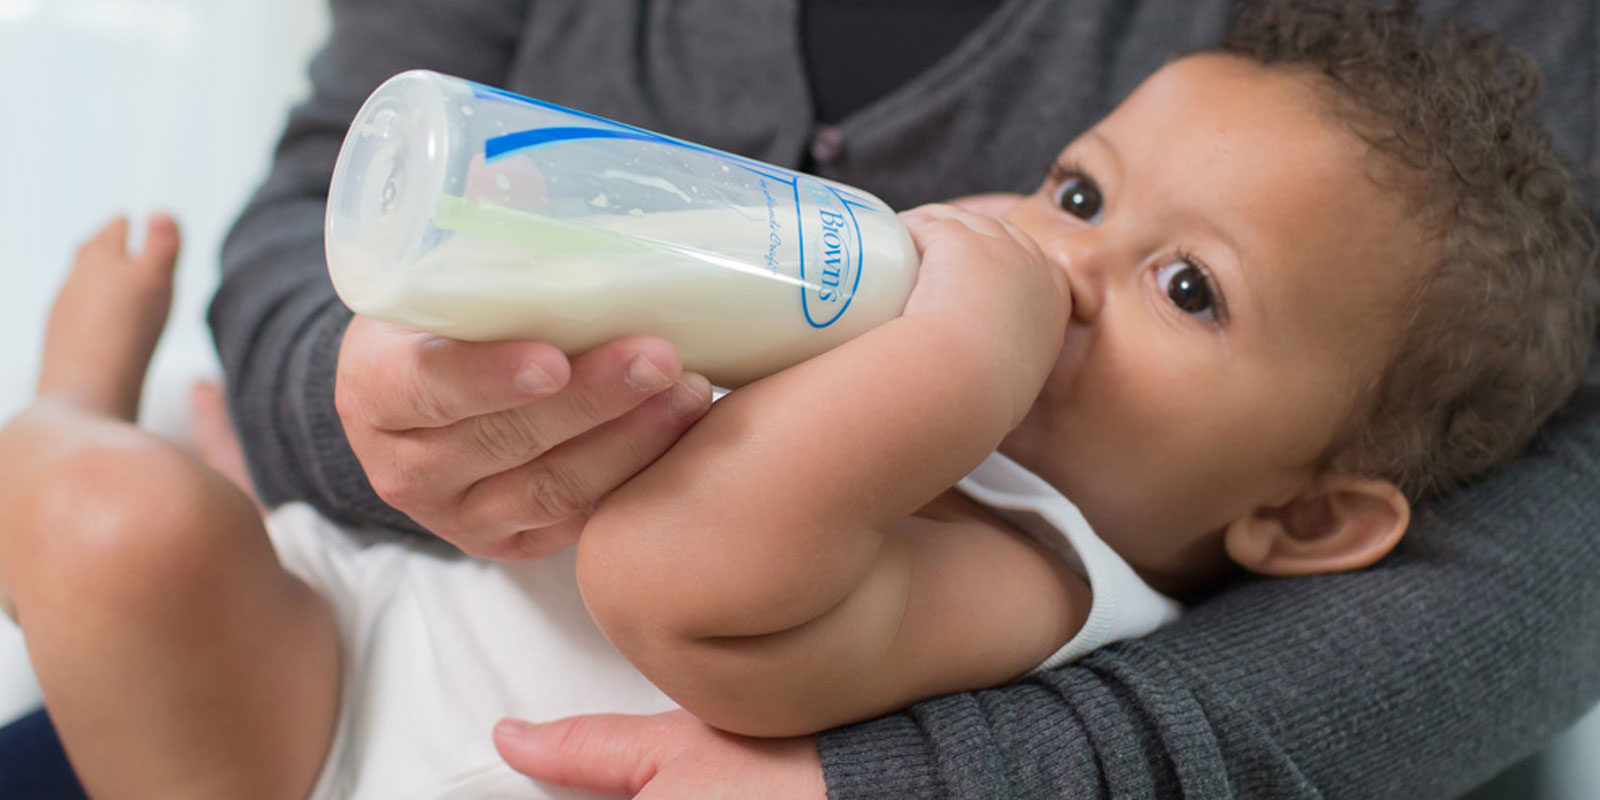 Baby drinking from a Dr. Brown's bottle